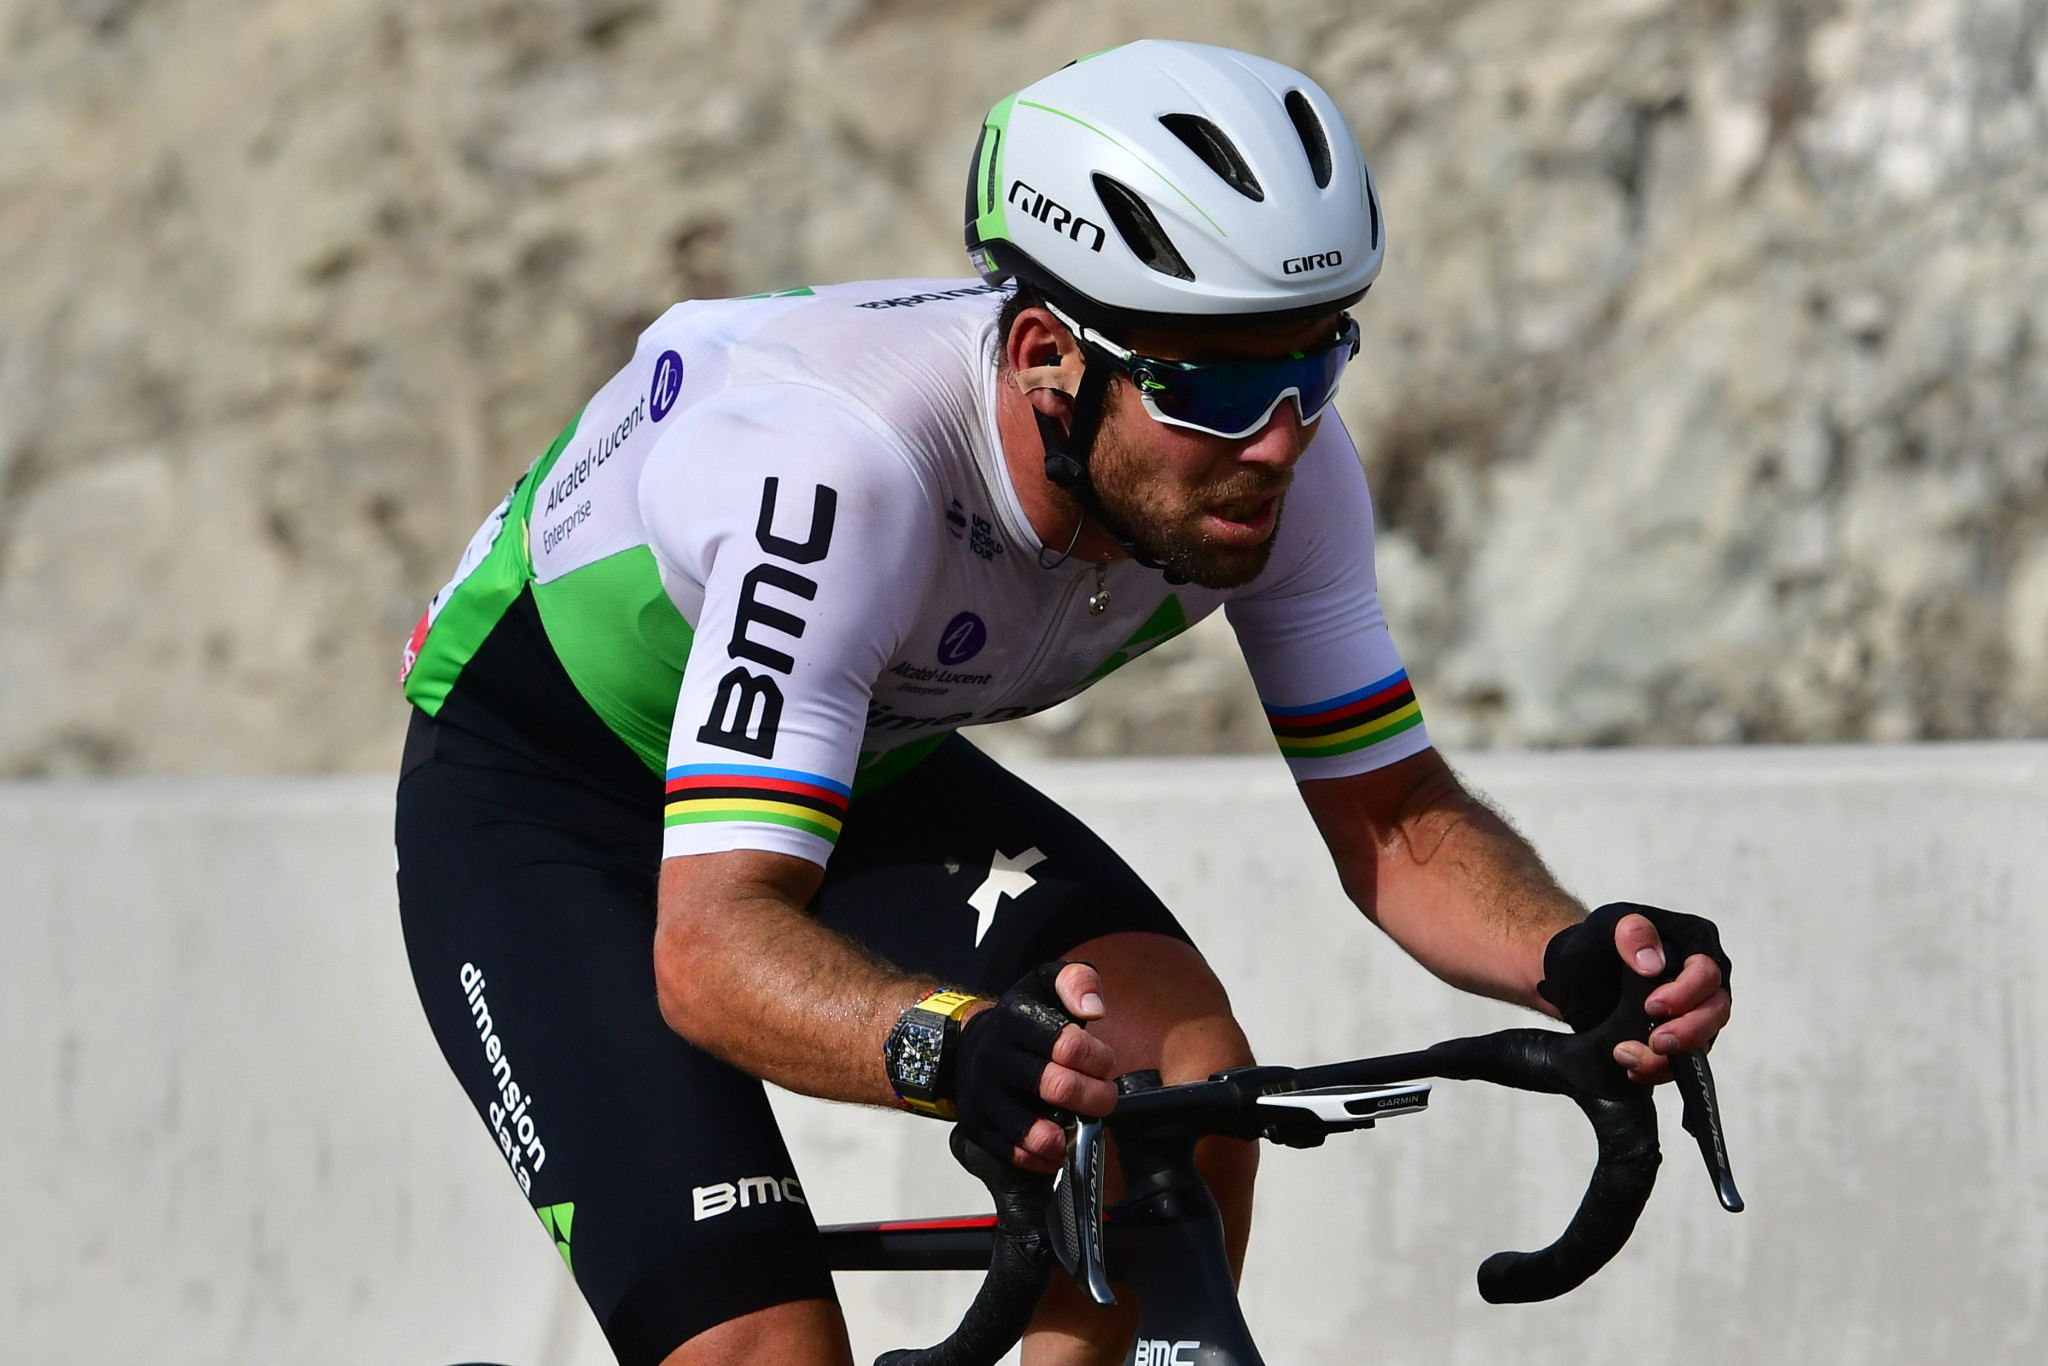 Manx sprinter Mark Cavendish will lead Team Dimension Data at the Tour de Pologne ©Getty Images